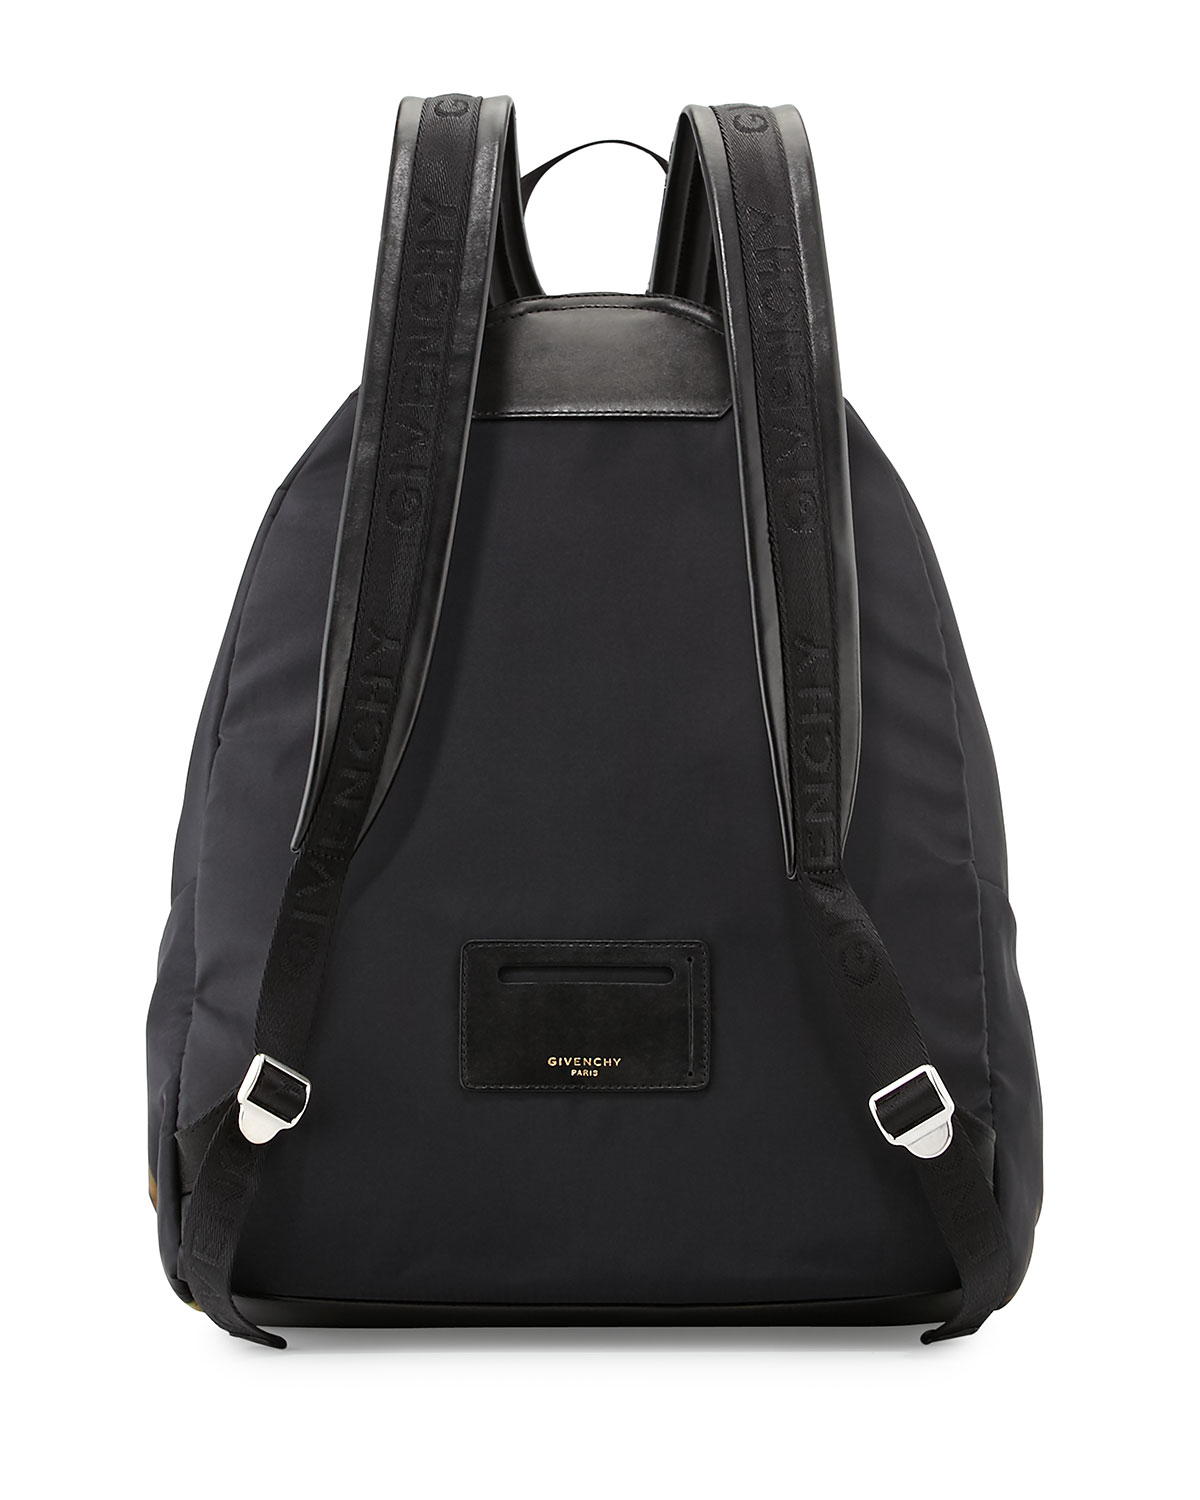 Lyst - Givenchy Skull-graphic Backpack in Black for Men